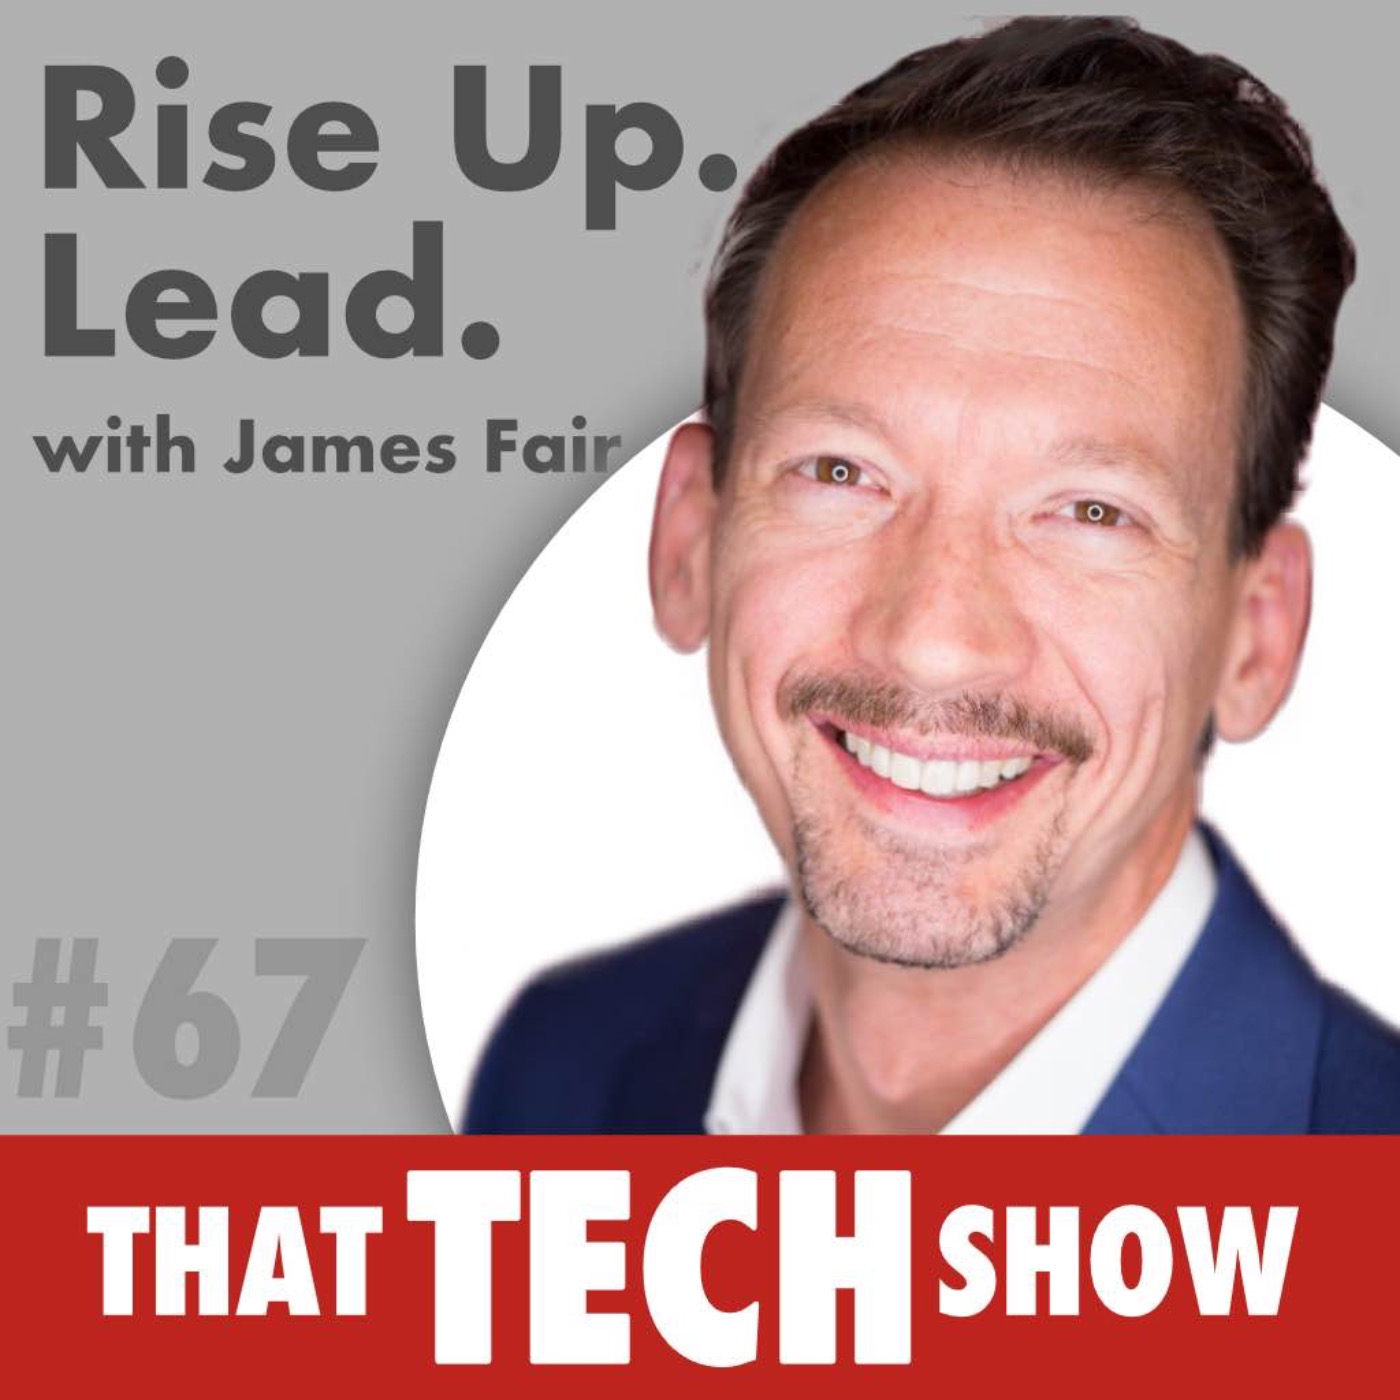 Episode 67 - Rise Up. Lead. with James Fair